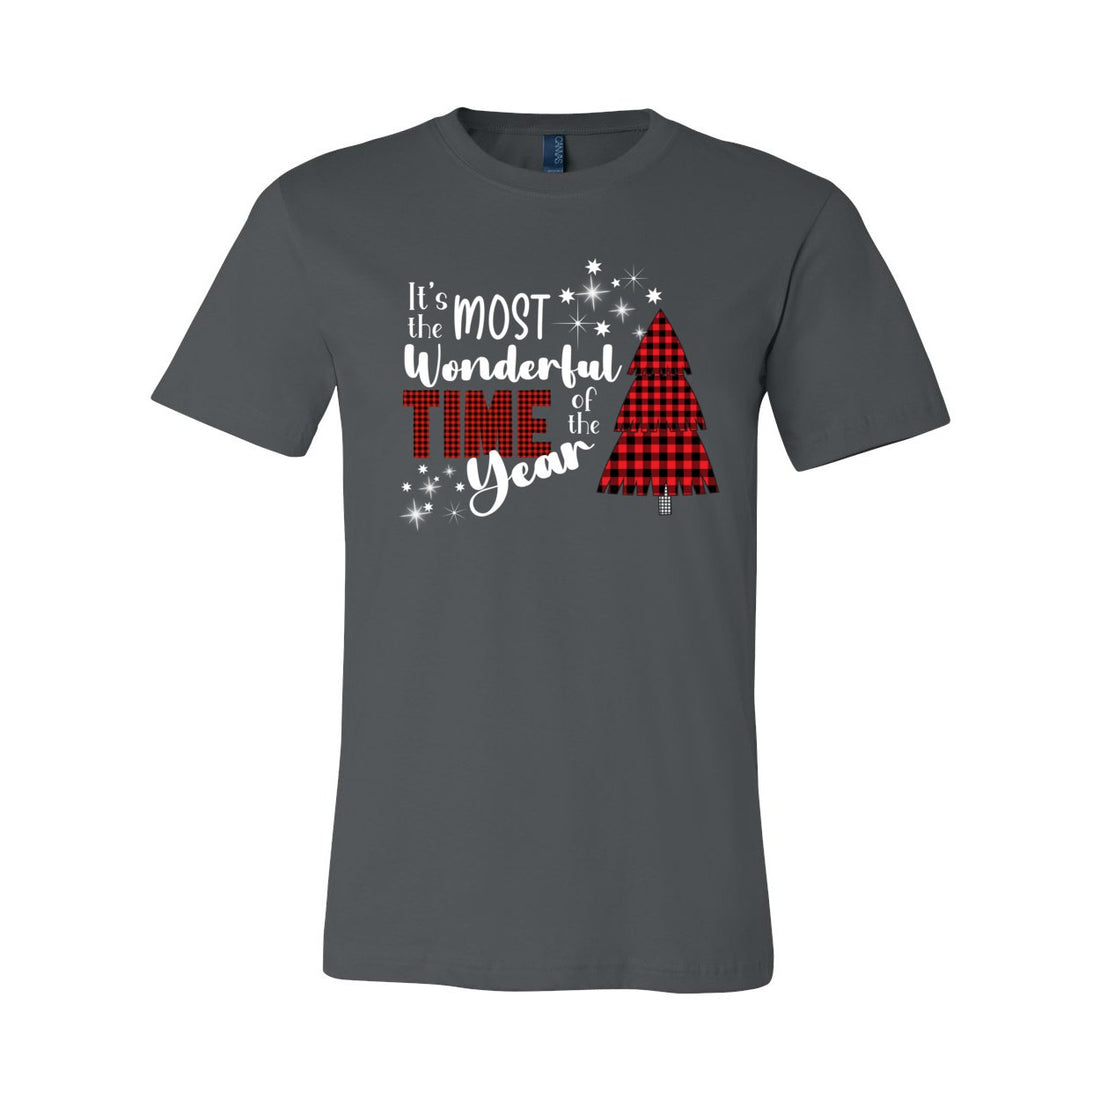 Wonderful Time Of Year - T-Shirts - Positively Sassy - Wonderful Time Of Year